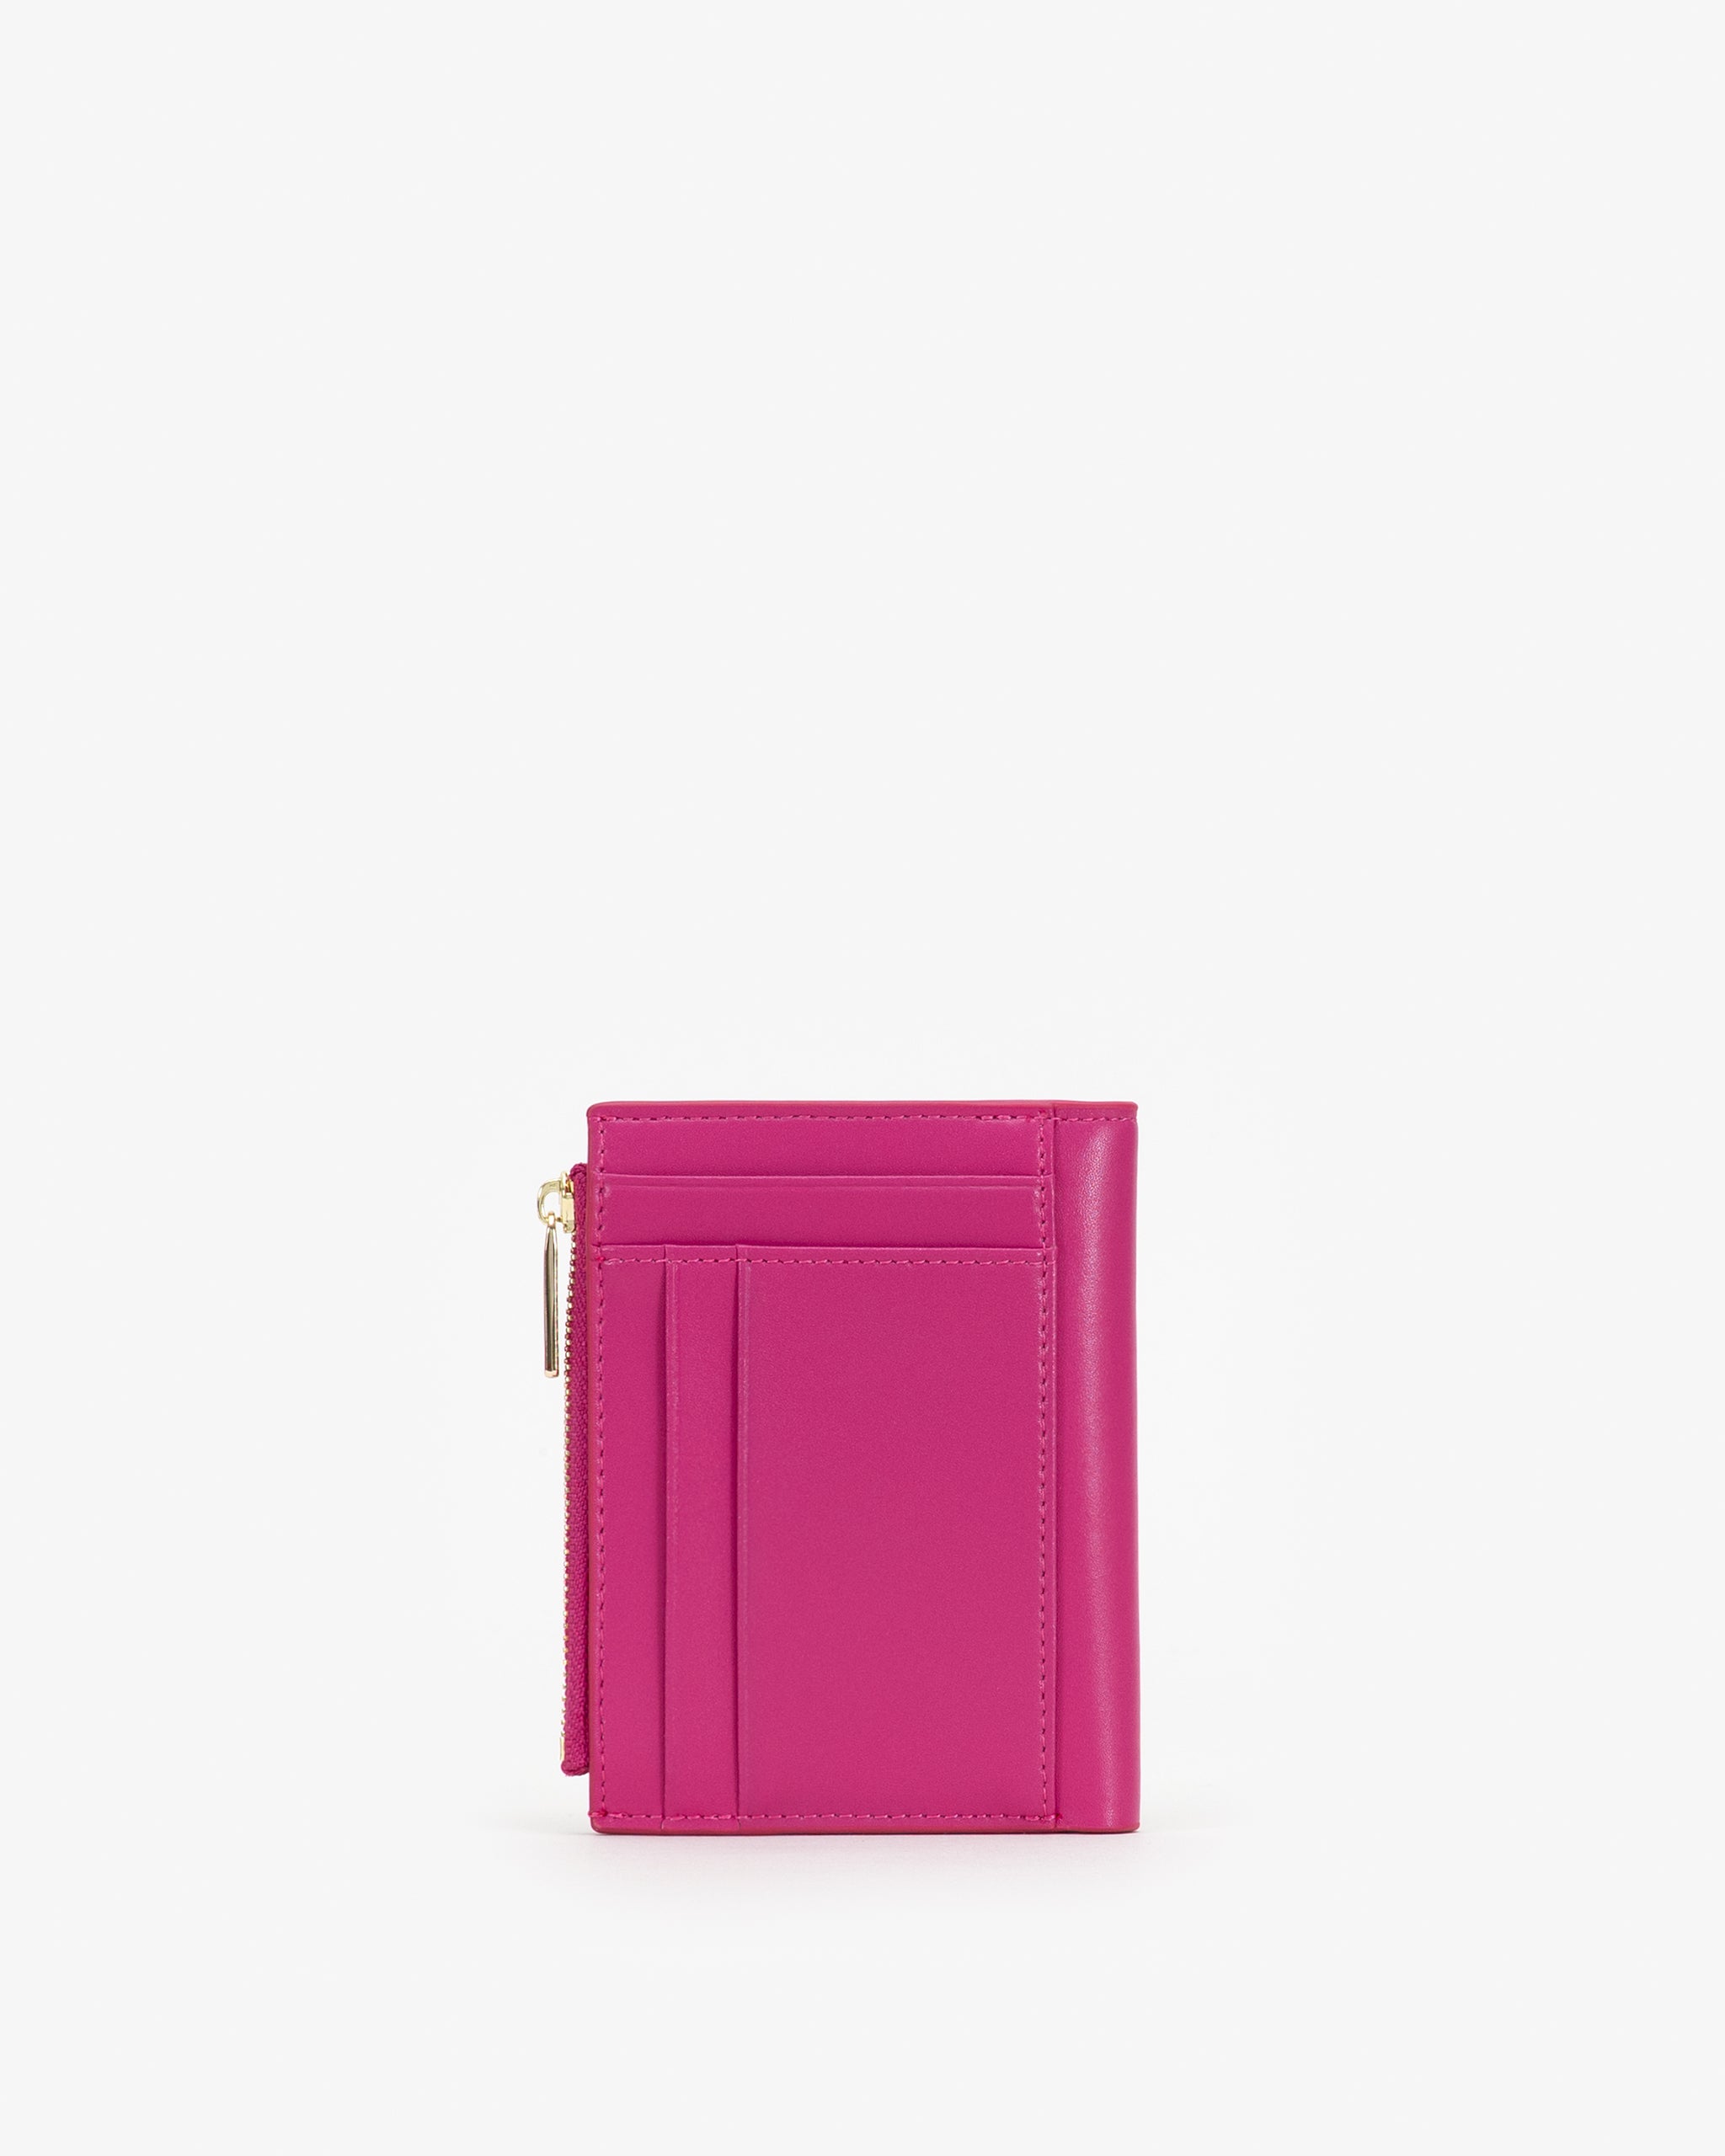 Wallet in Fuchsia with Personalised Hardware